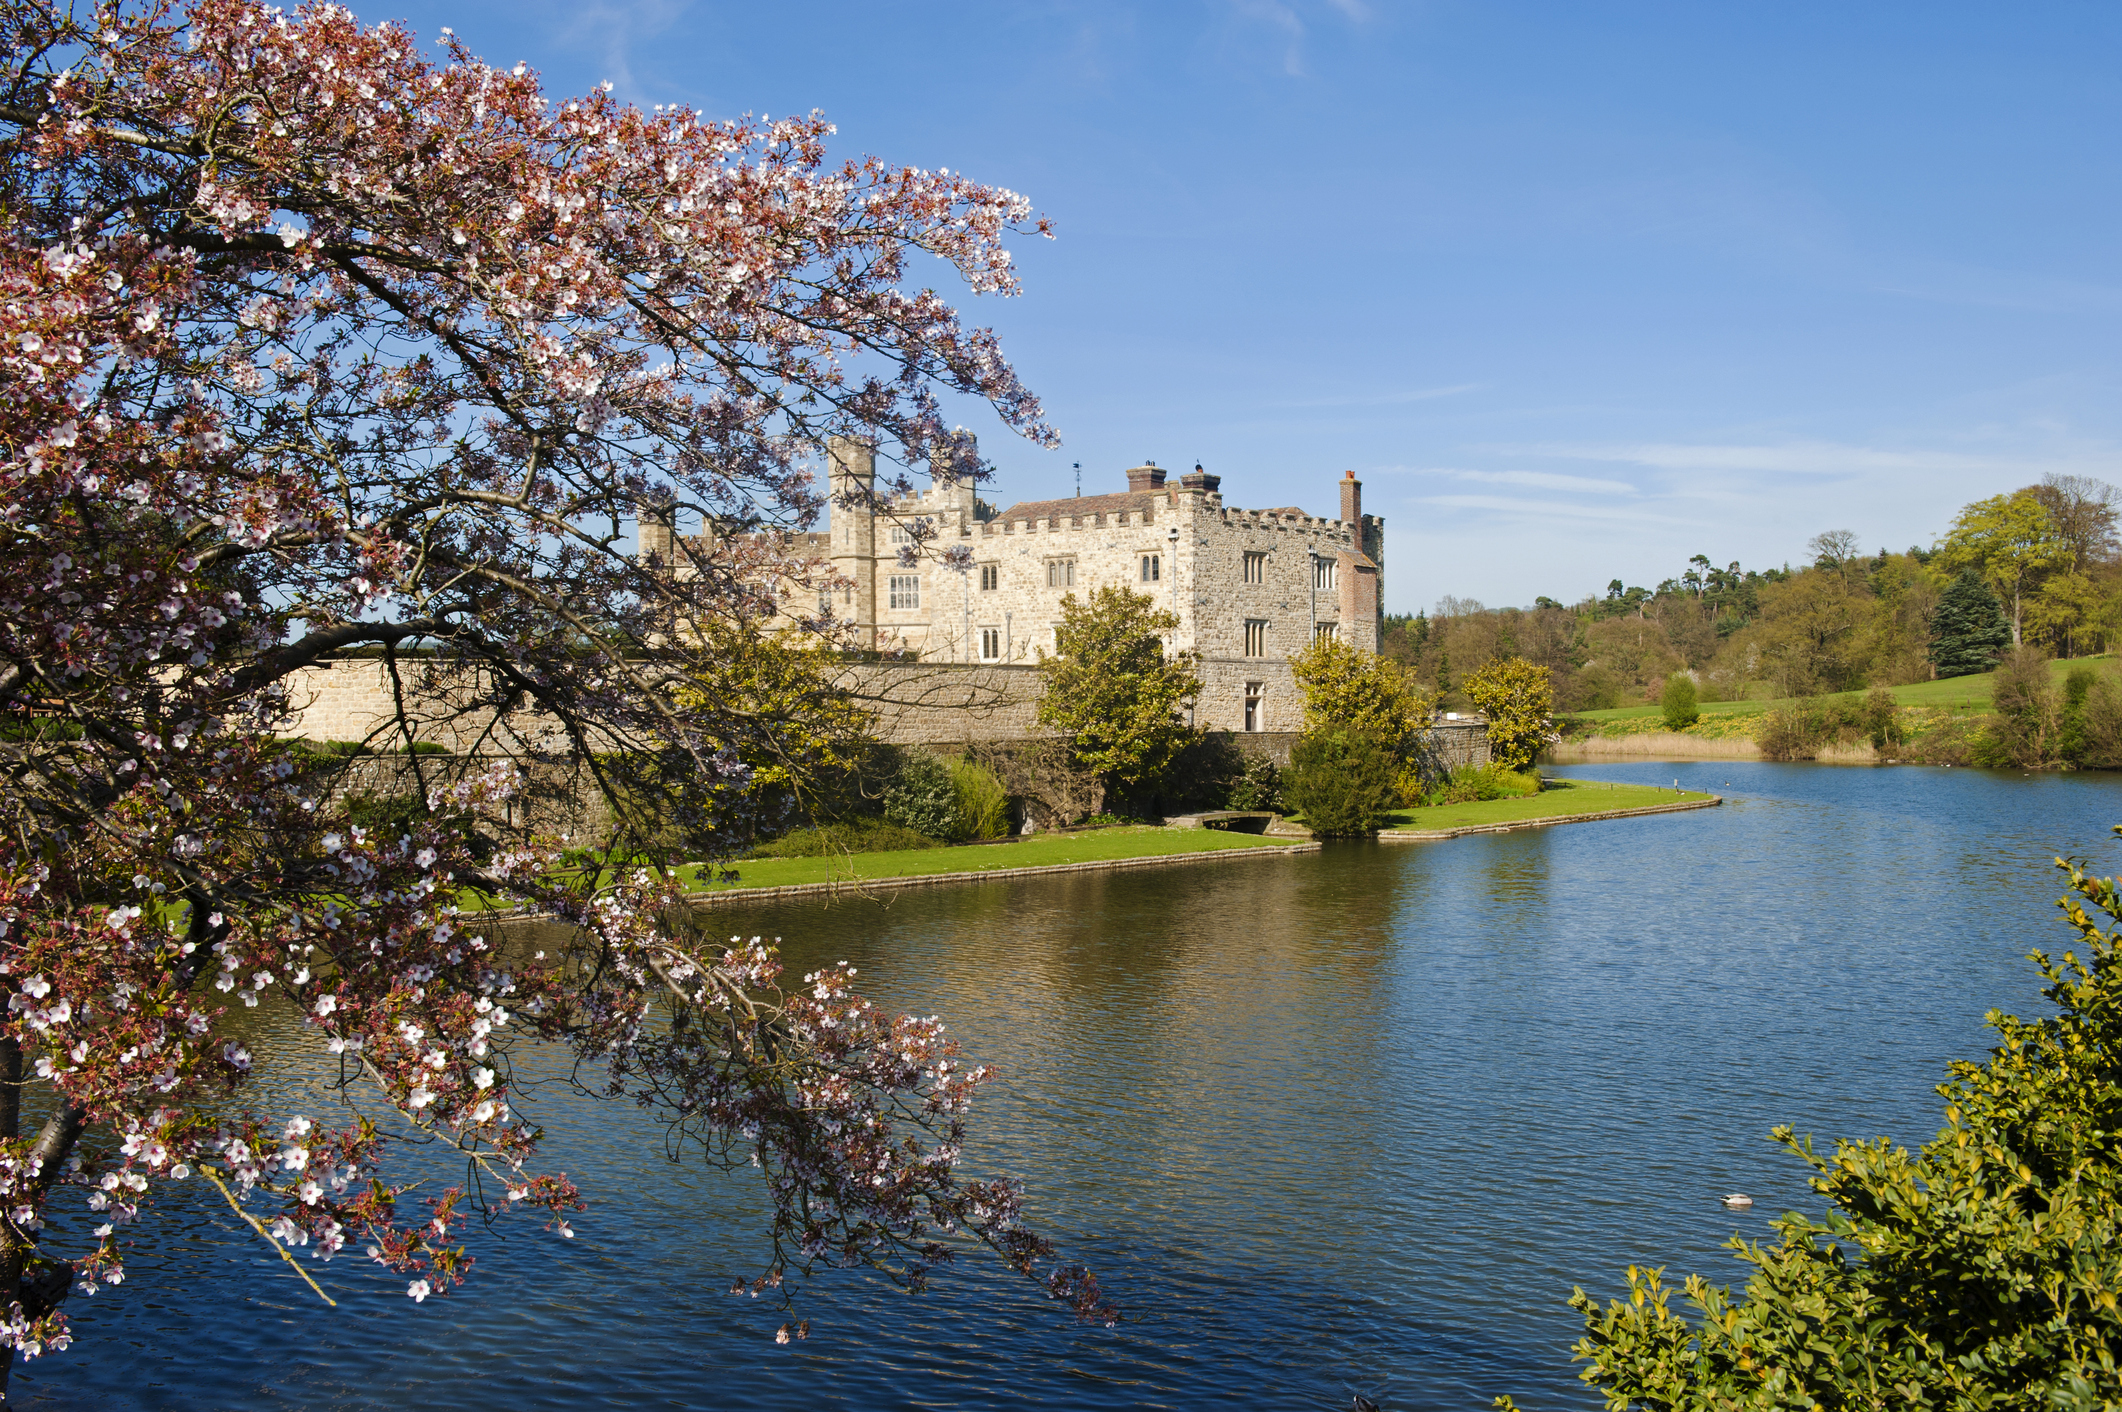 Leeds castle with moat